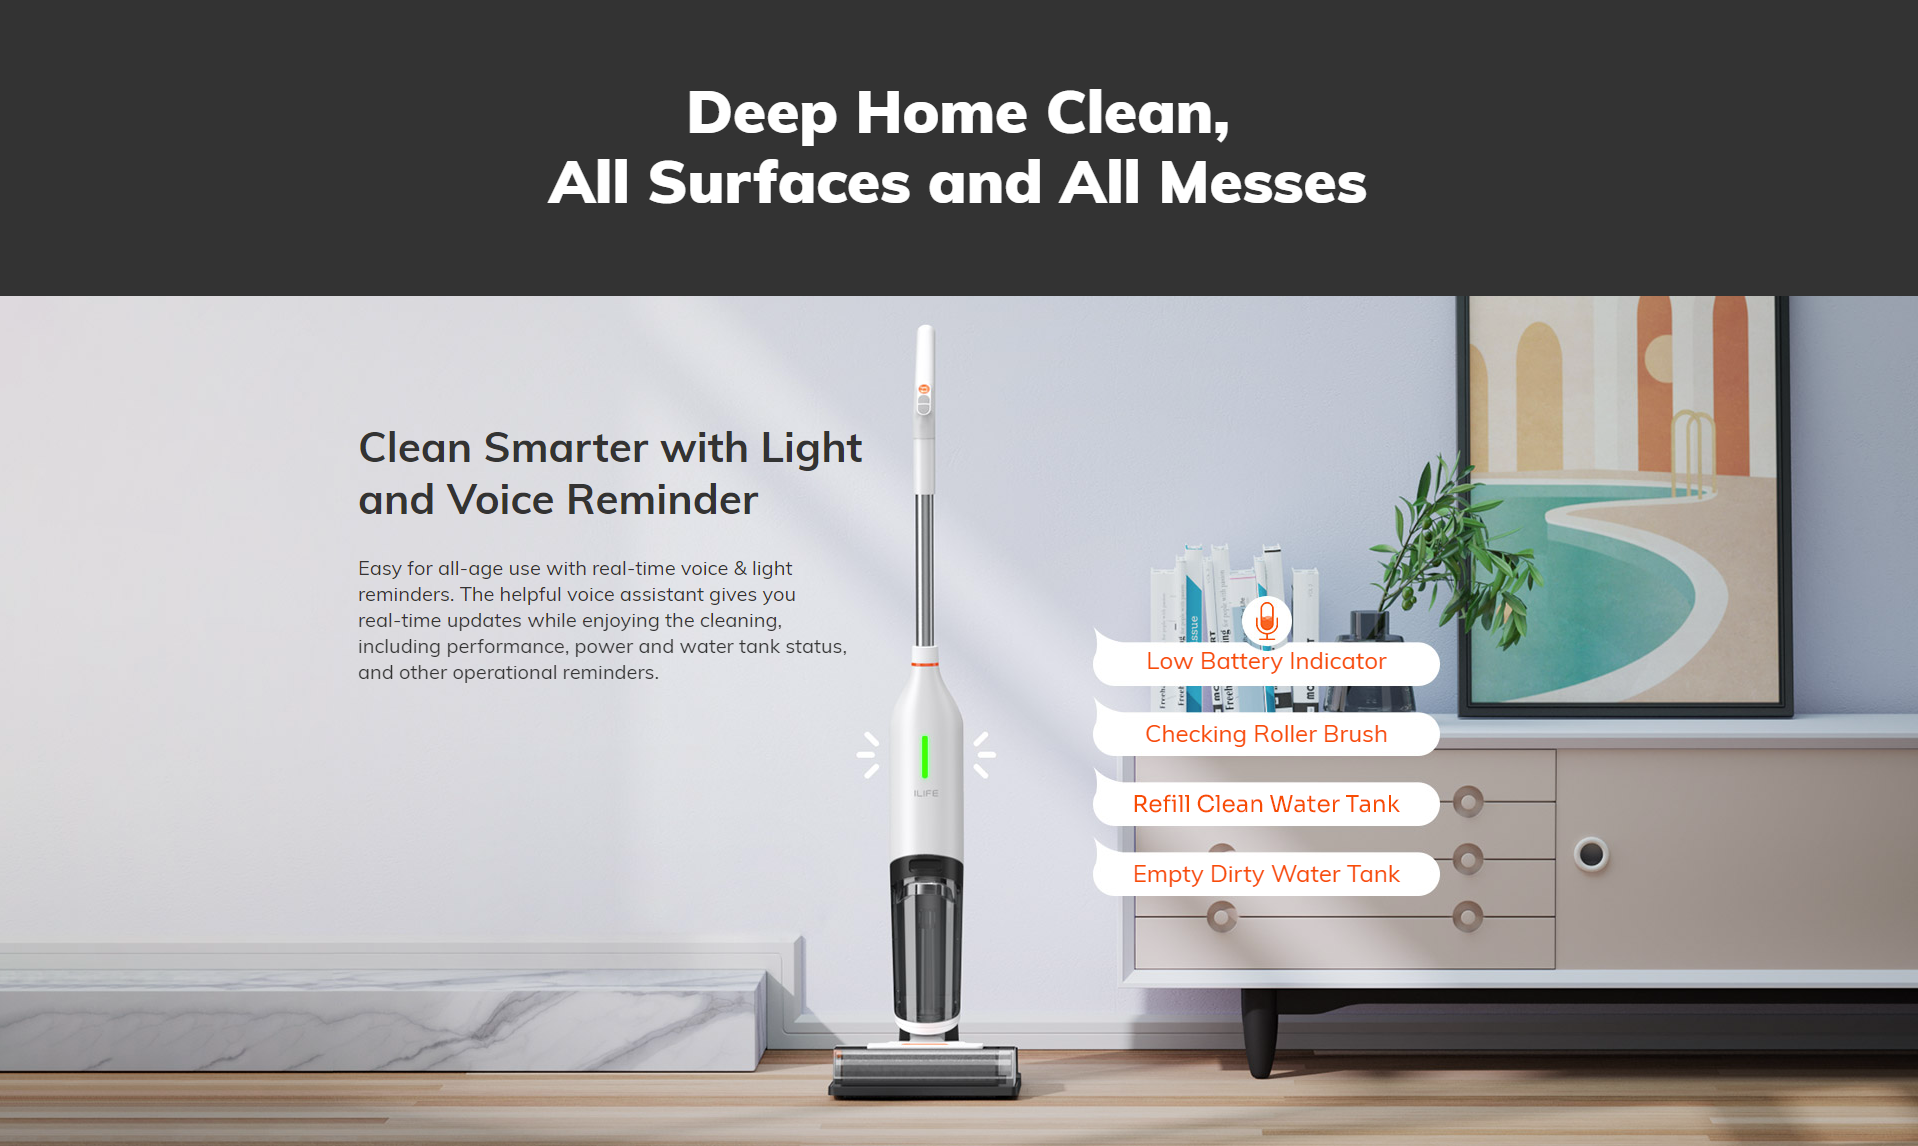 Clean Smarter with Light and Voice Reminder